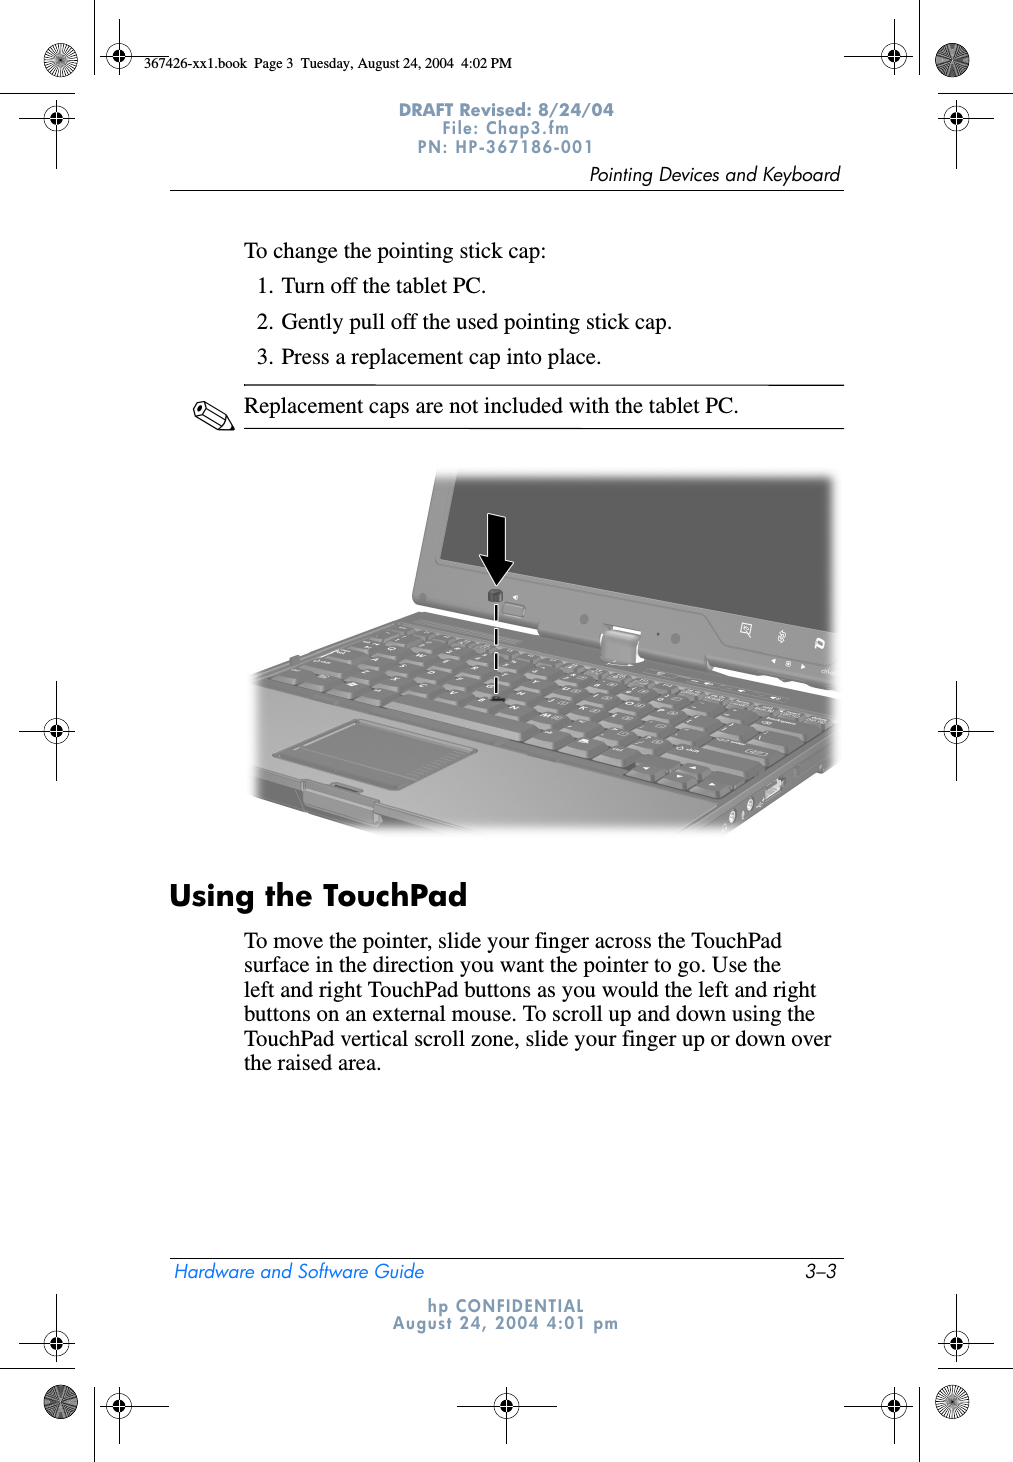 Pointing Devices and KeyboardHardware and Software Guide 3–3DRAFT Revised: 8/24/04File: Chap3.fm PN: HP-367186-001 hp CONFIDENTIALAugust 24, 2004 4:01 pmTo change the pointing stick cap:1. Turn off the tablet PC.2. Gently pull off the used pointing stick cap.3. Press a replacement cap into place.✎Replacement caps are not included with the tablet PC.Using the TouchPadTo move the pointer, slide your finger across the TouchPad surface in the direction you want the pointer to go. Use the left and right TouchPad buttons as you would the left and right buttons on an external mouse. To scroll up and down using the TouchPad vertical scroll zone, slide your finger up or down over the raised area.367426-xx1.book  Page 3  Tuesday, August 24, 2004  4:02 PM